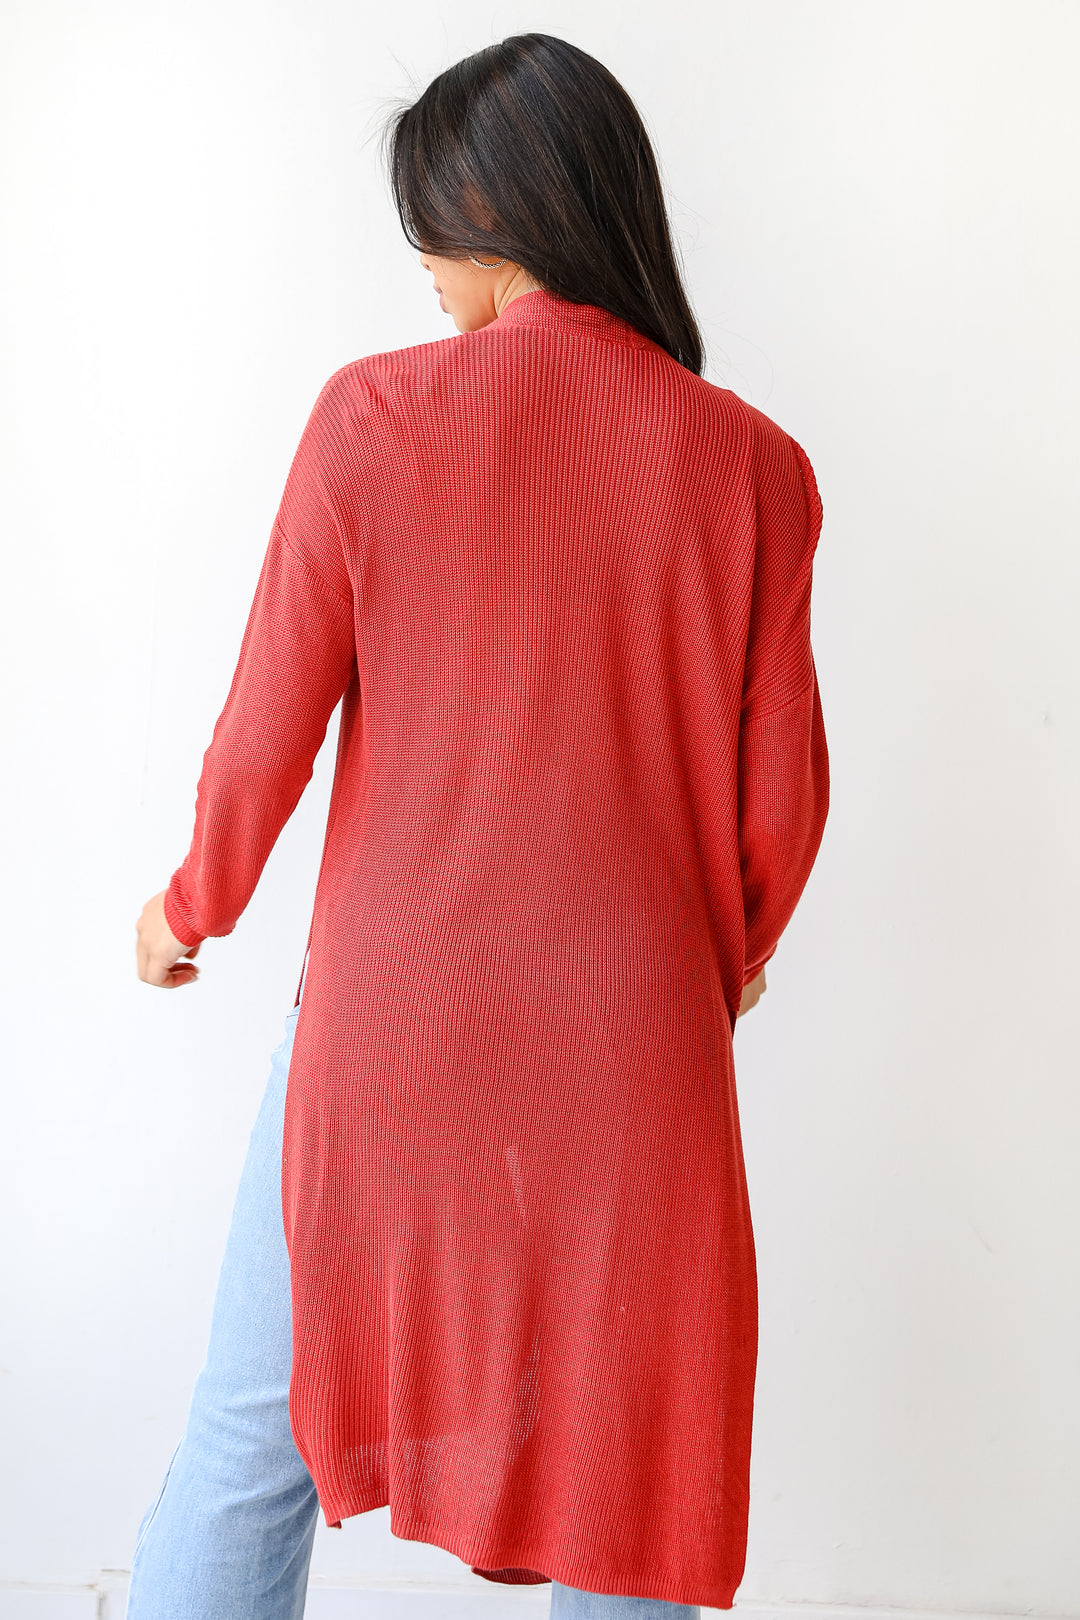 Cardigan in coral back view